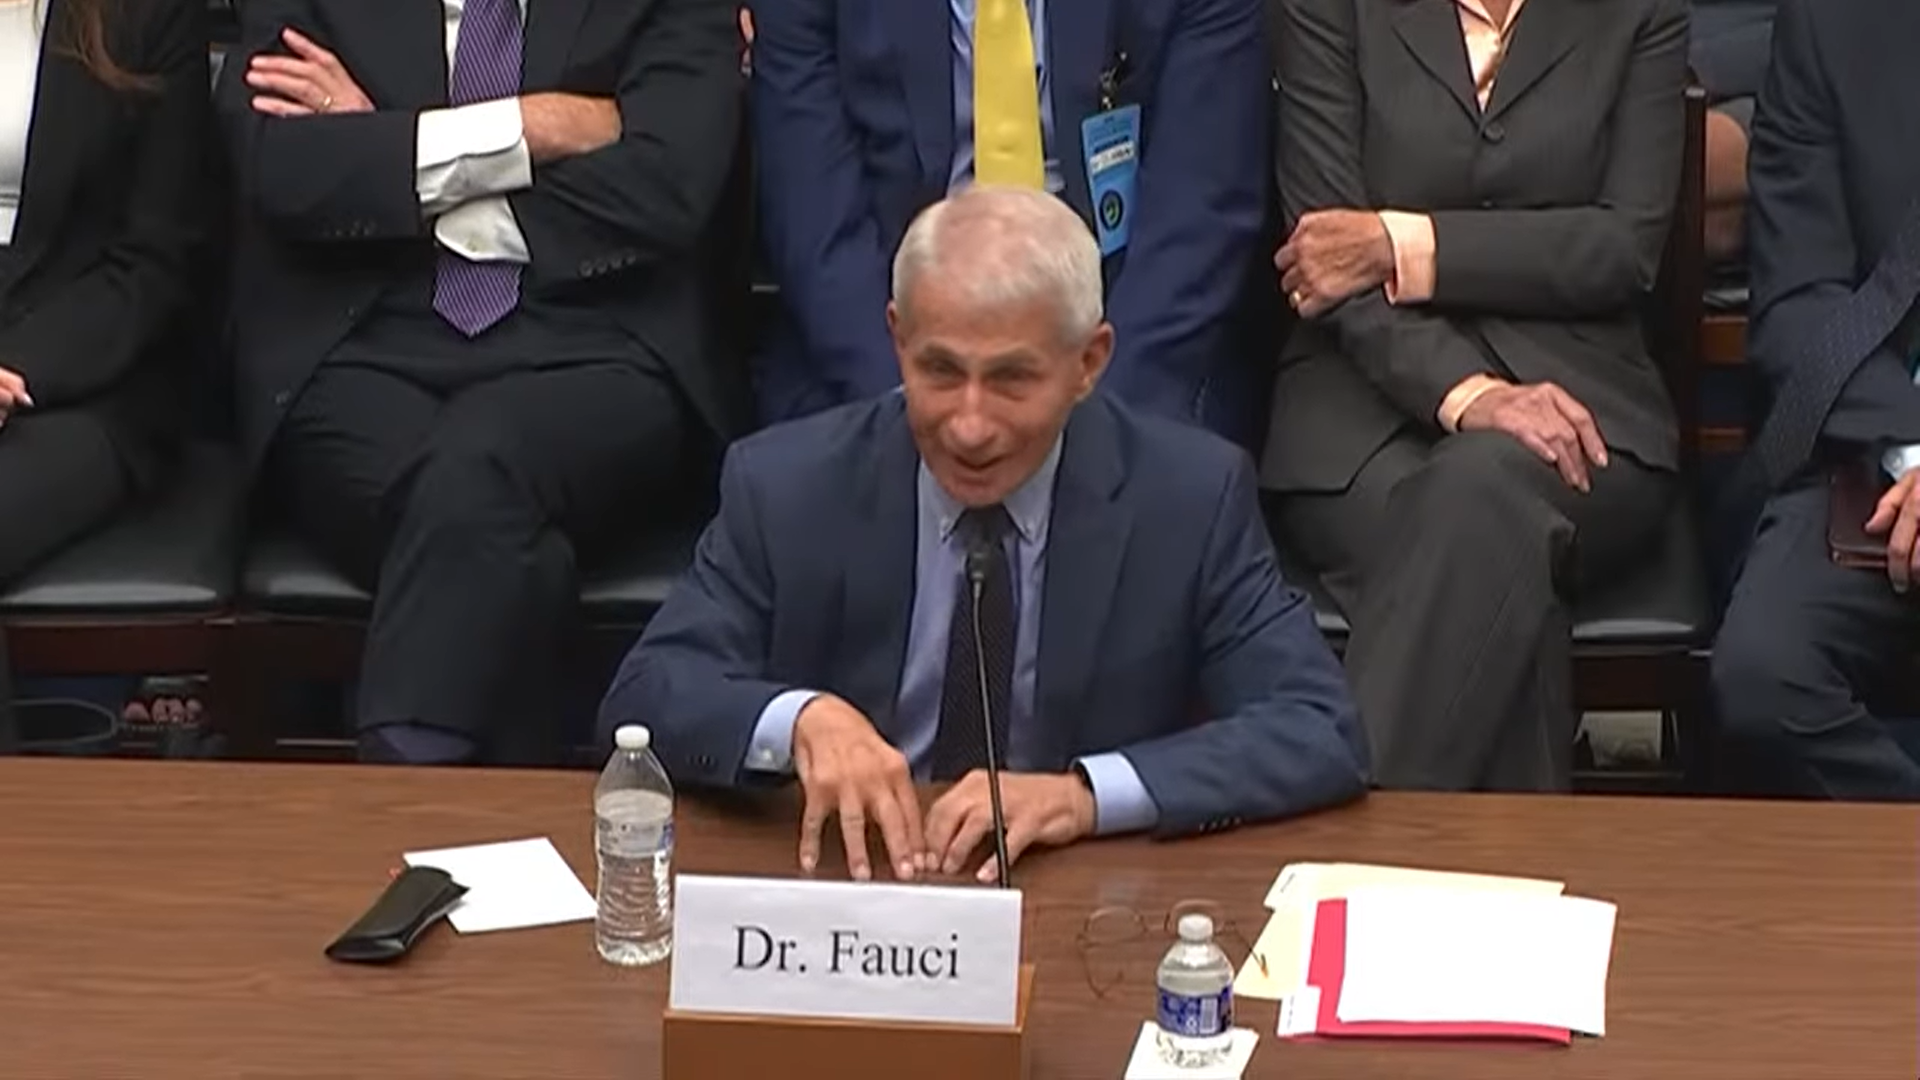 Fauci’s Testimony Leads Washington Post to Correct Its Own Misreporting